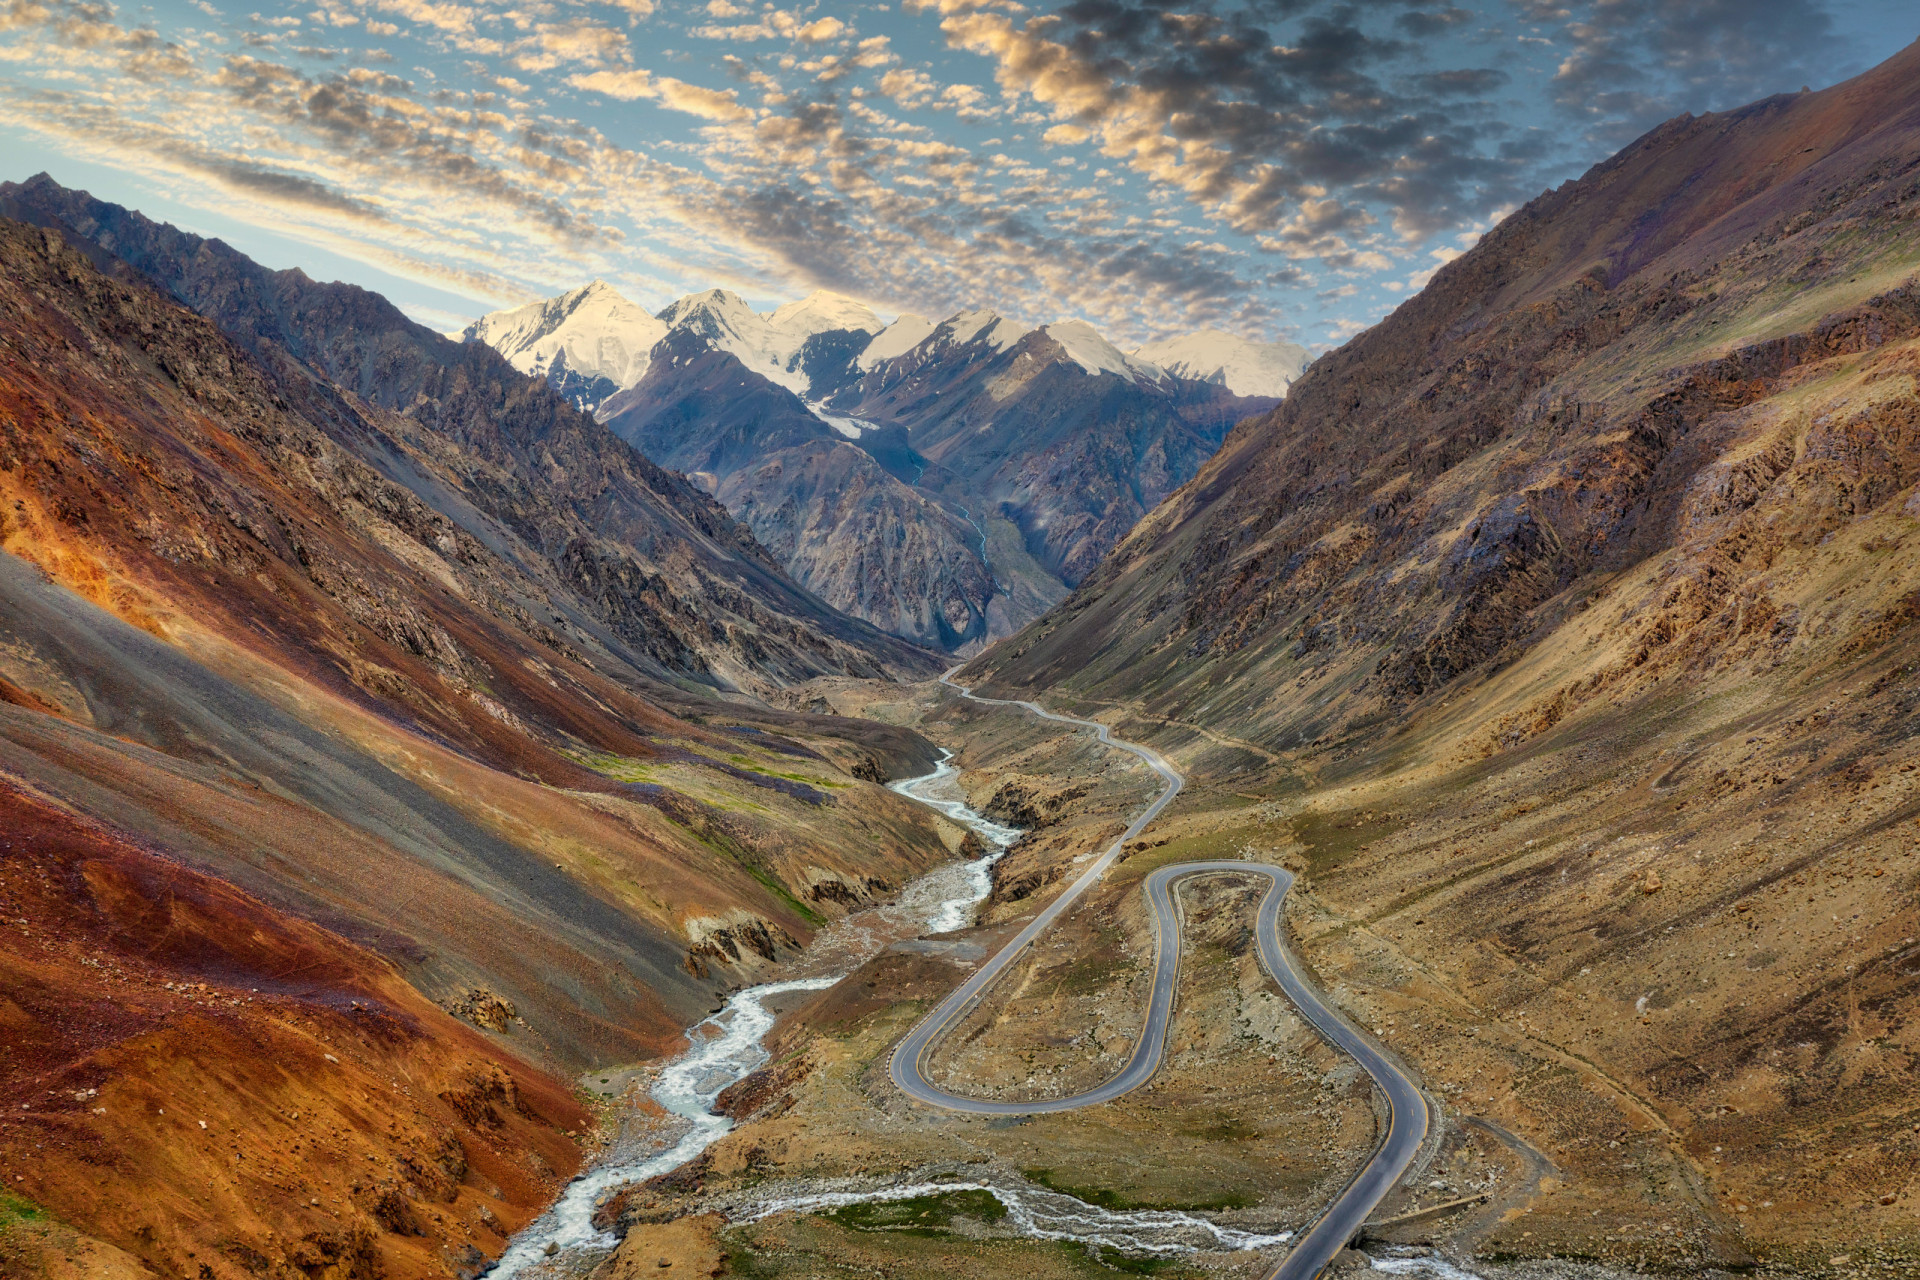 <p>One of the <a href="https://www.starsinsider.com/travel/518210/do-you-dare-drive-on-the-highest-roads-in-the-world" rel="noopener">highest</a> paved roads in the world is the Karakoram Highway, in northern Pakistan. It reaches a maximum elevation of 15,466 feet (4,714 m) near the Khunjerab Pass. </p><p><a href="https://www.msn.com/en-us/community/channel/vid-7xx8mnucu55yw63we9va2gwr7uihbxwc68fxqp25x6tg4ftibpra?cvid=94631541bc0f4f89bfd59158d696ad7e">Follow us and access great exclusive content every day</a></p>